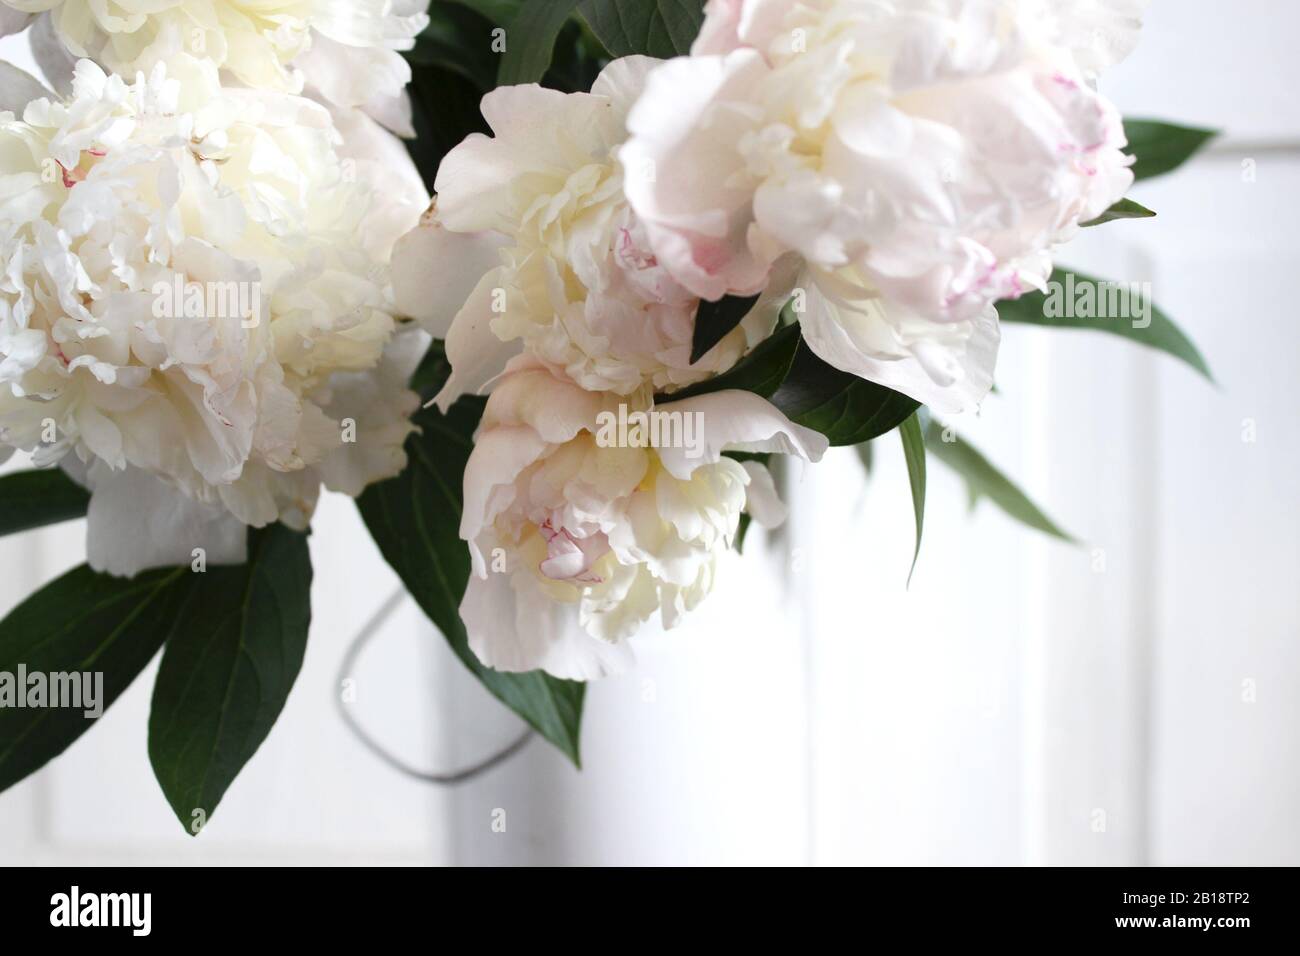 White and Pale Pink Peonies Arrangement Closeup. Wedding Holidays Flowers. Stock Photo